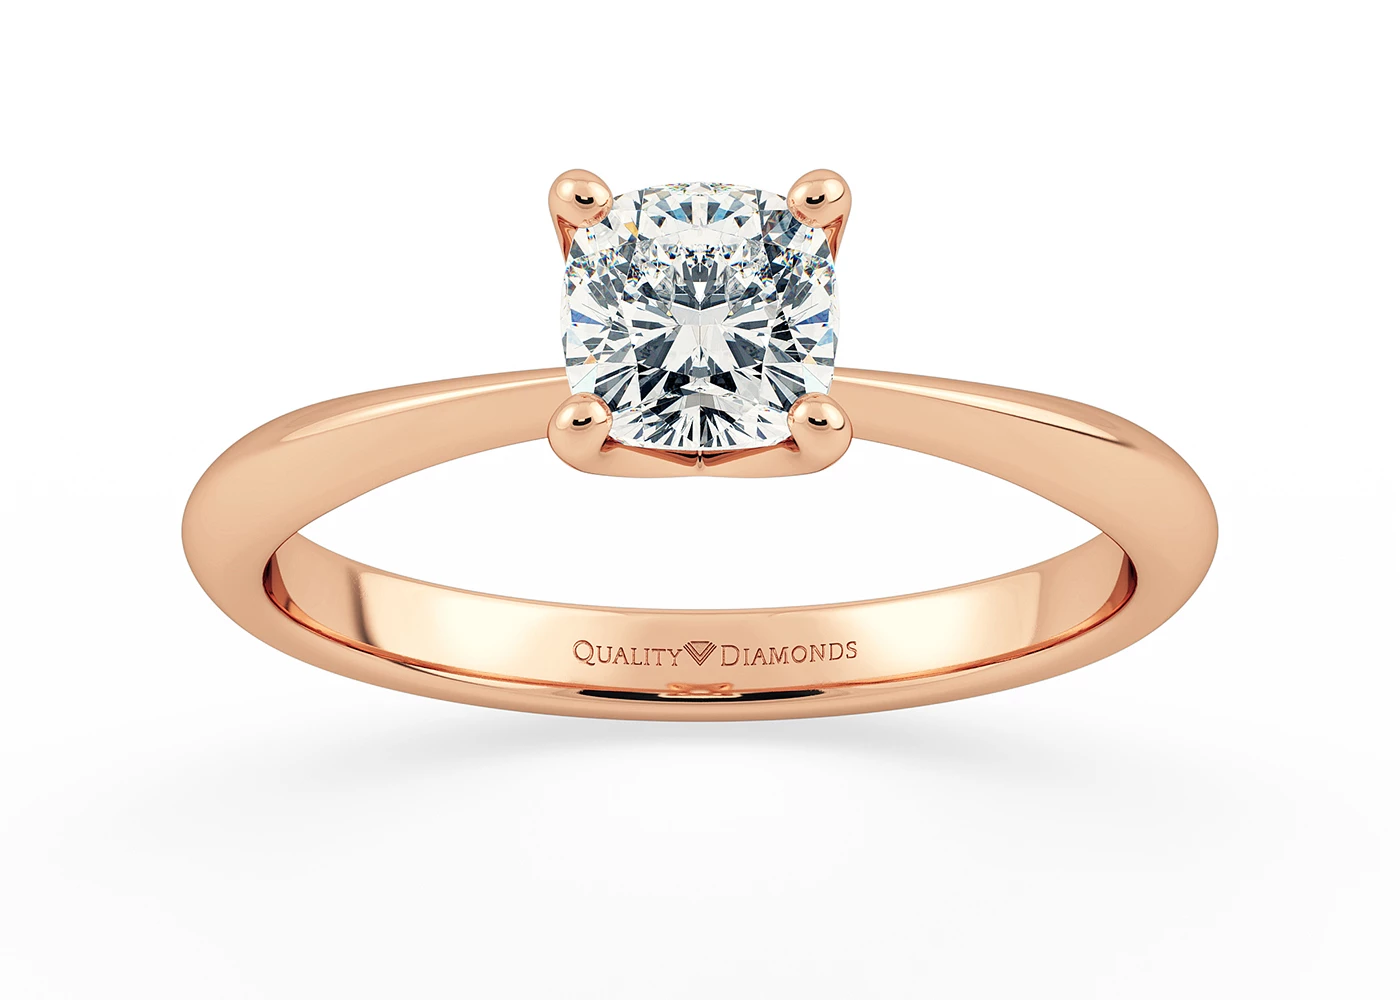 Two Carat Cushion Solitaire Diamond Engagement Ring in 18K Rose Gold